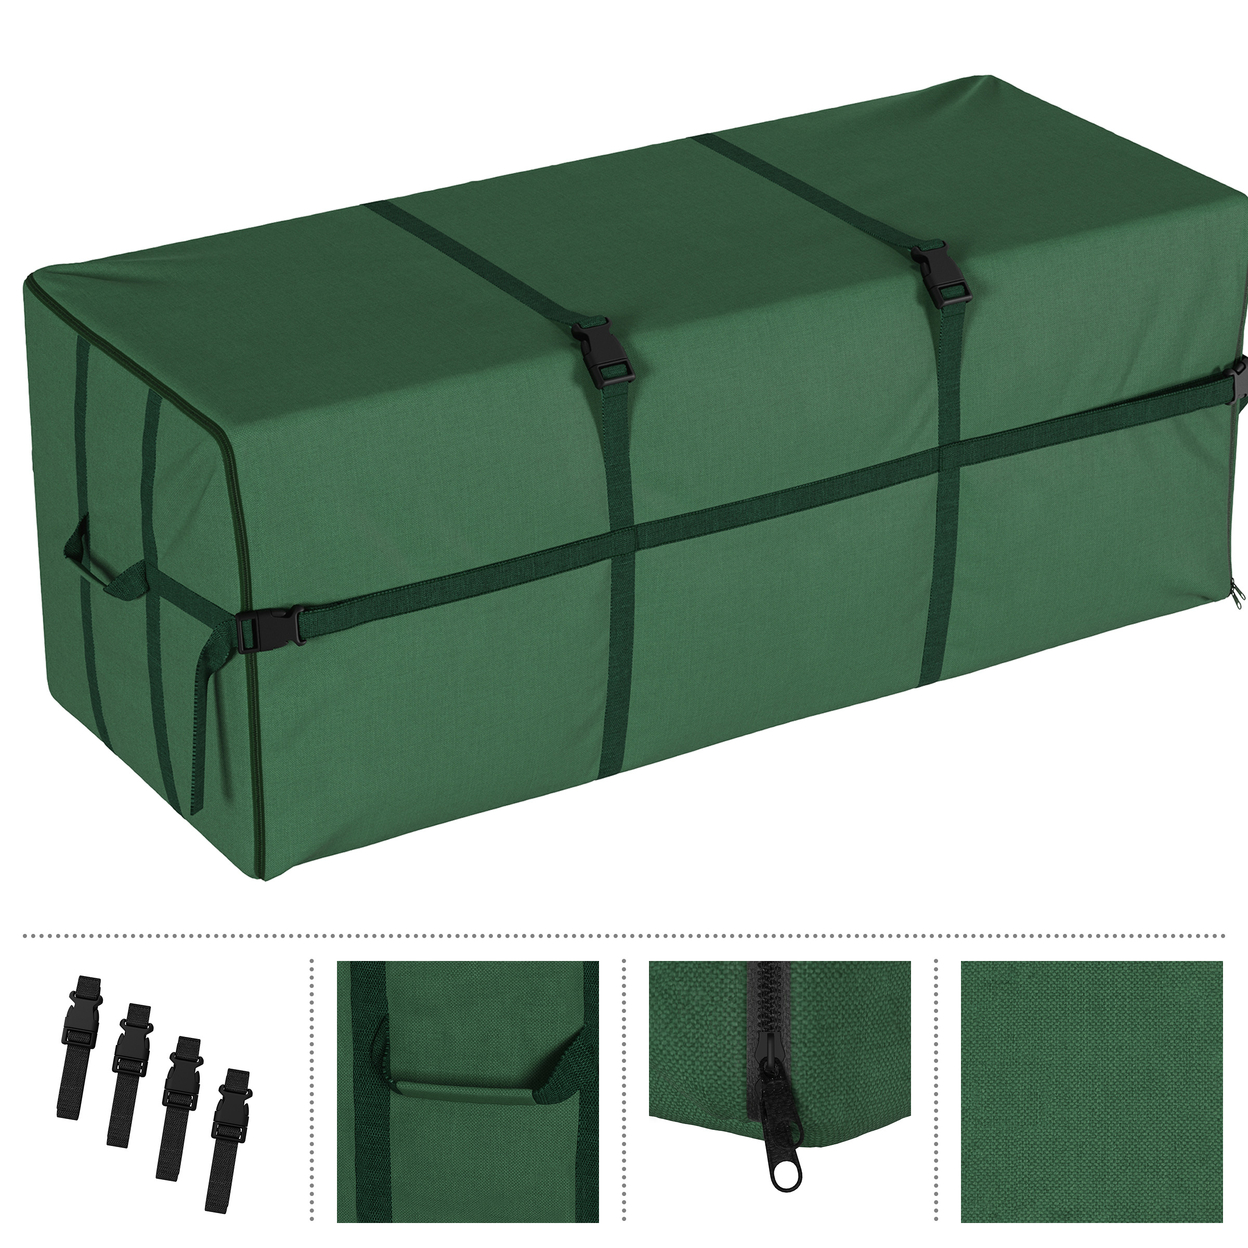 Elf Stor Heavy Duty Canvas Christmas Tree Storage Bag Large For 9 Foot Tree - Green